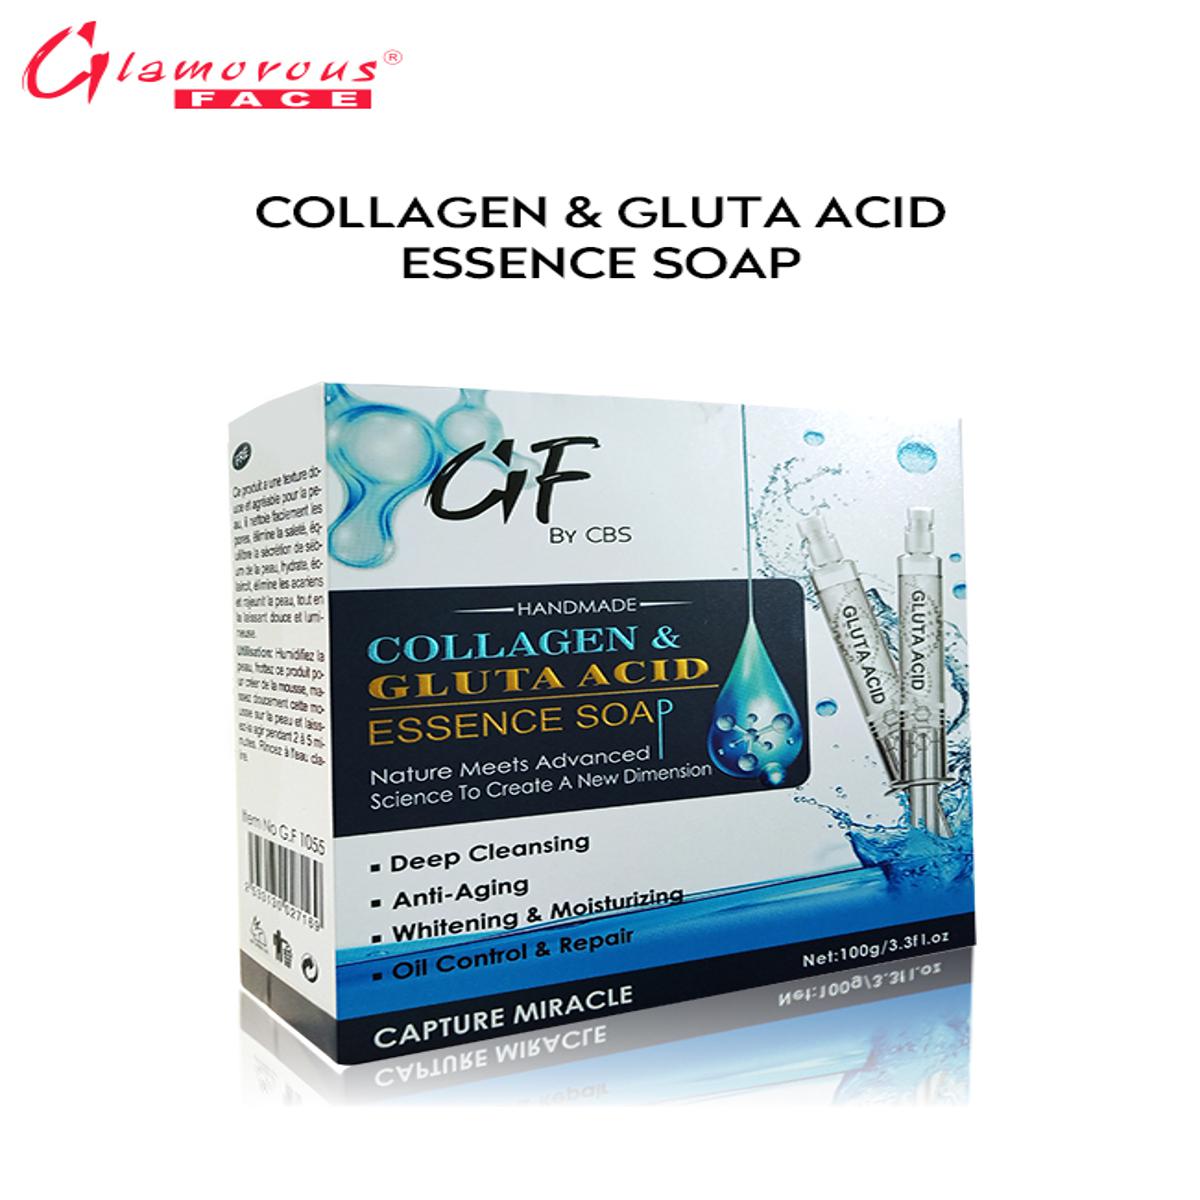 Glamorous Face Collagen And Gluta Acid Soap , Handmade Soap | Deep Cleansing | Anti - Aging | Moisturizing | Oil Control And Repair Capture Miracle